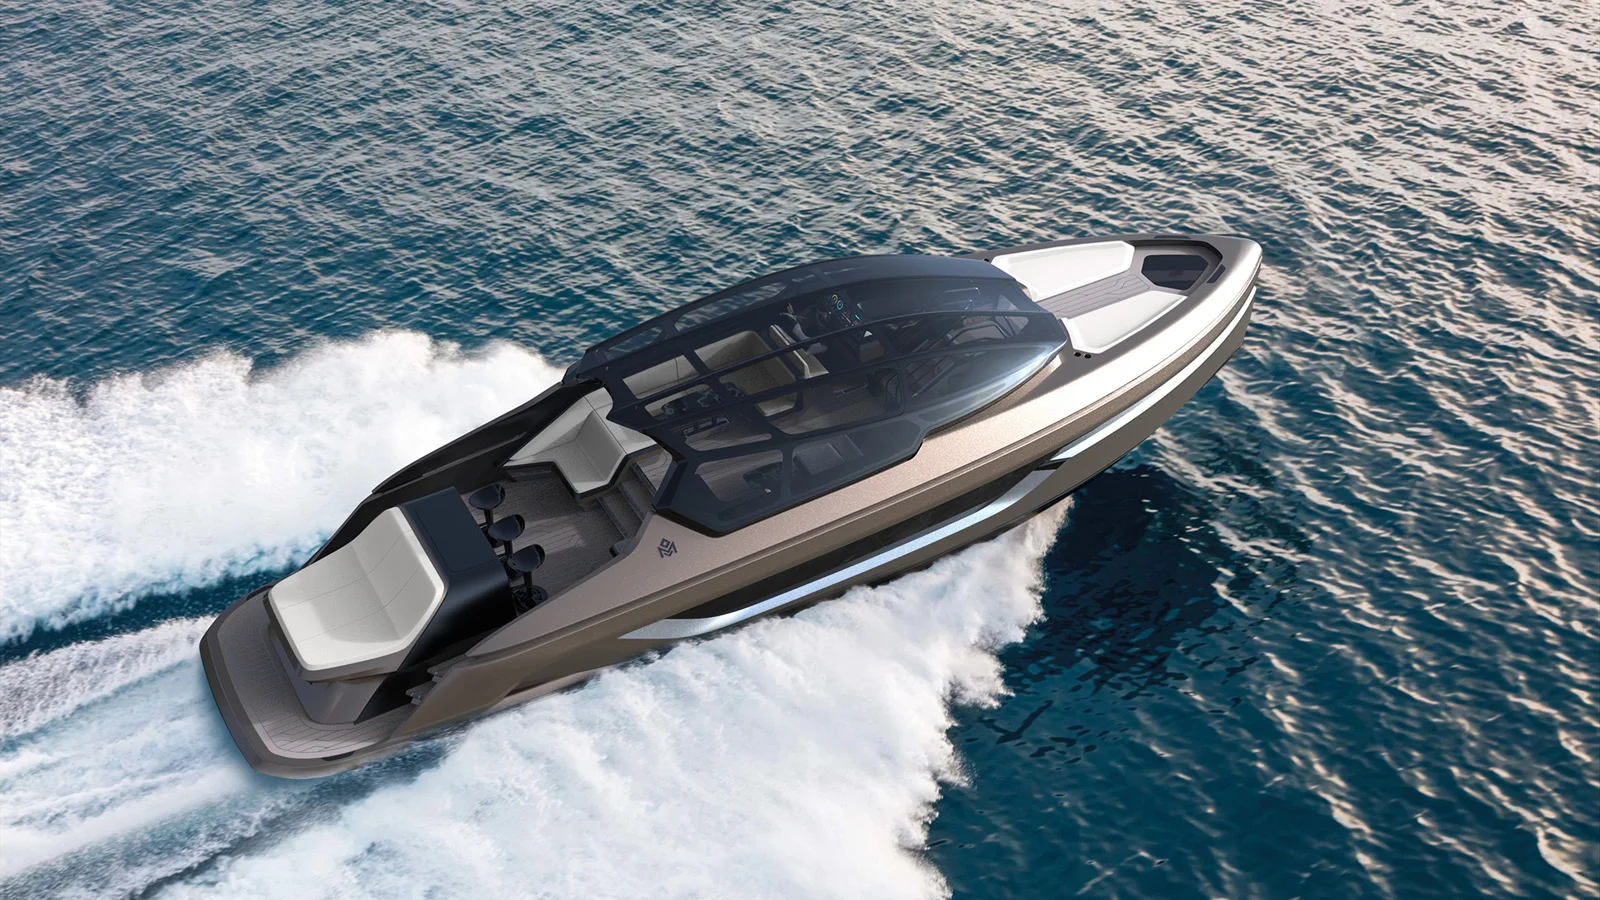 a fulThe superstructure adorned with a glass dome is one of the standout features of Mirarri yachts